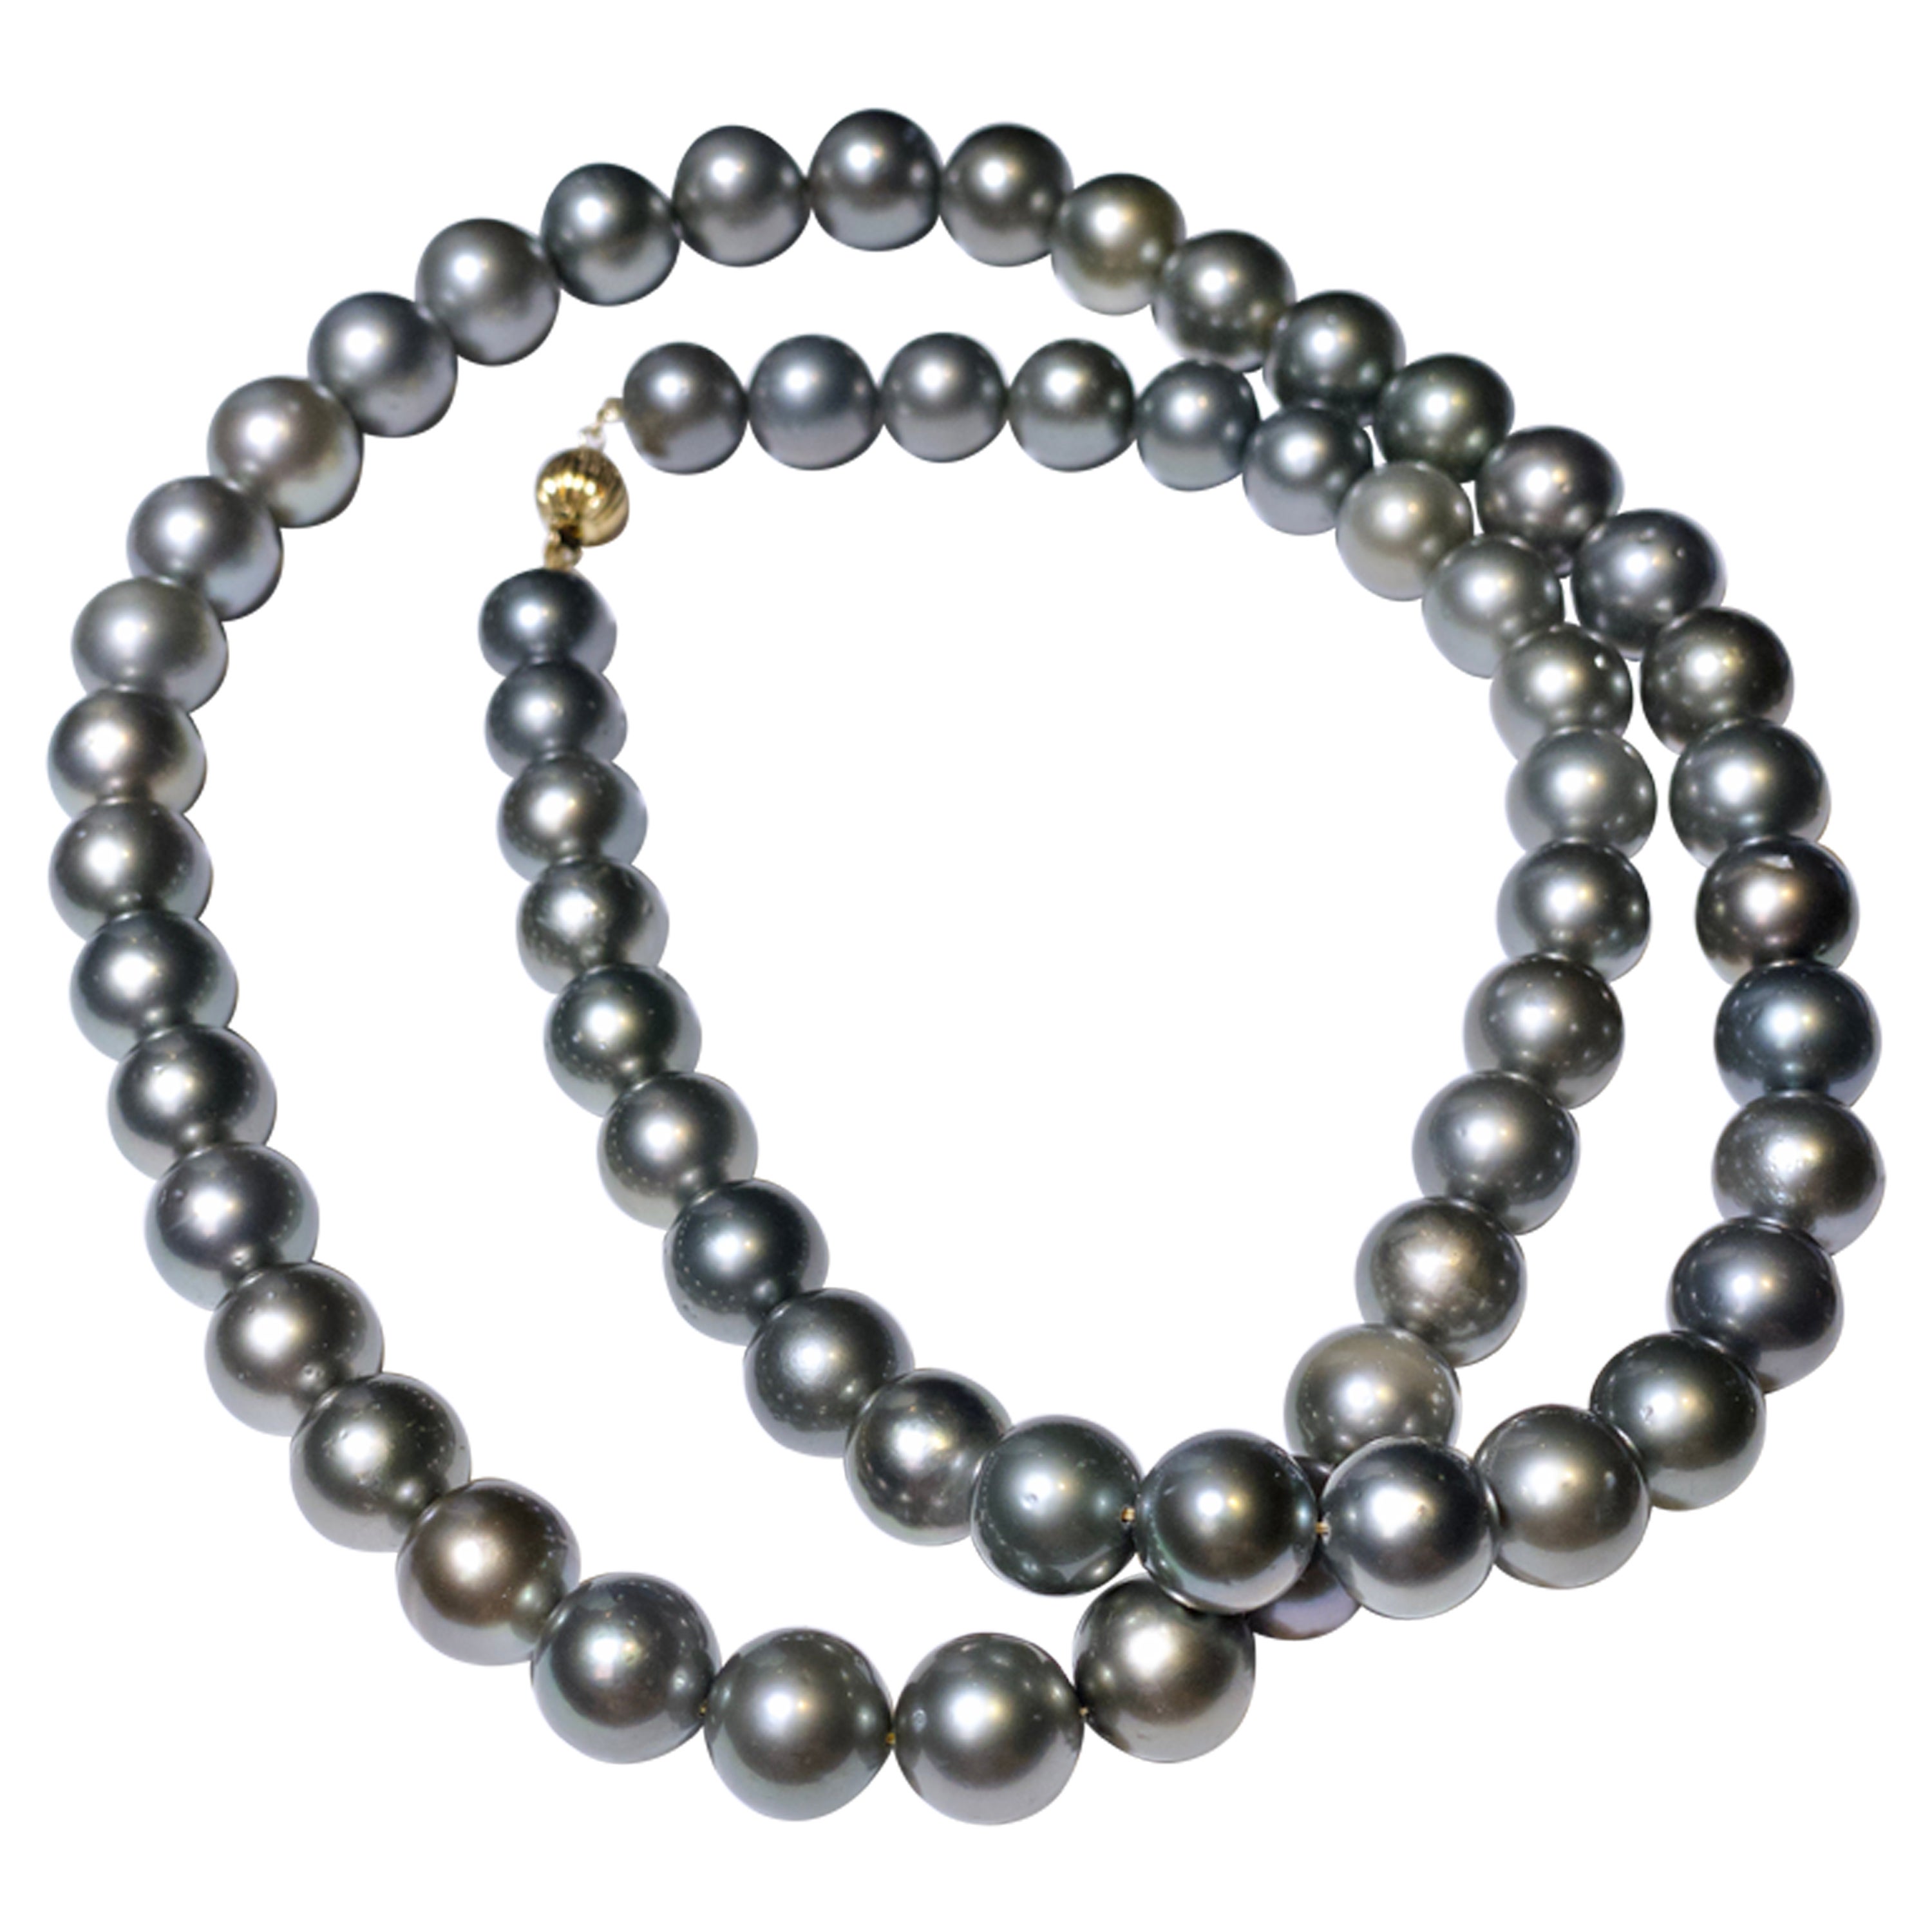 Grey Colour Silver Tone Tahitian Pearl Necklace with 18k Gold Clasp